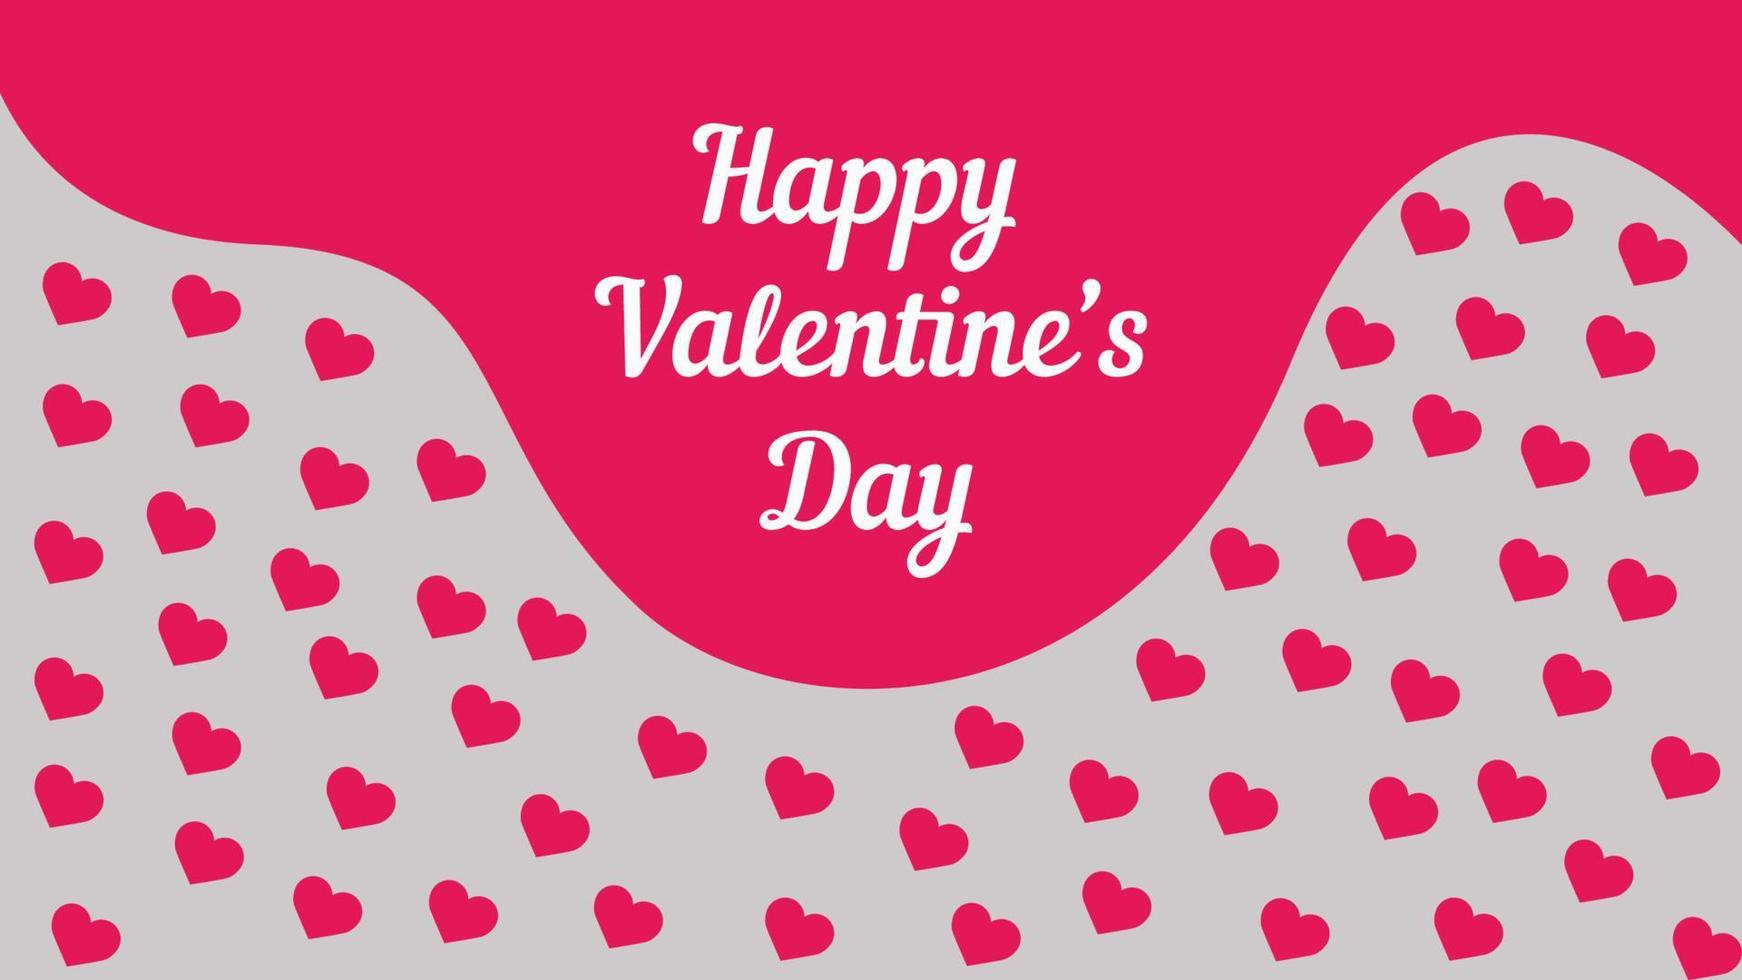 Happy Valentine's Day wishes background with heart shape pattern vector